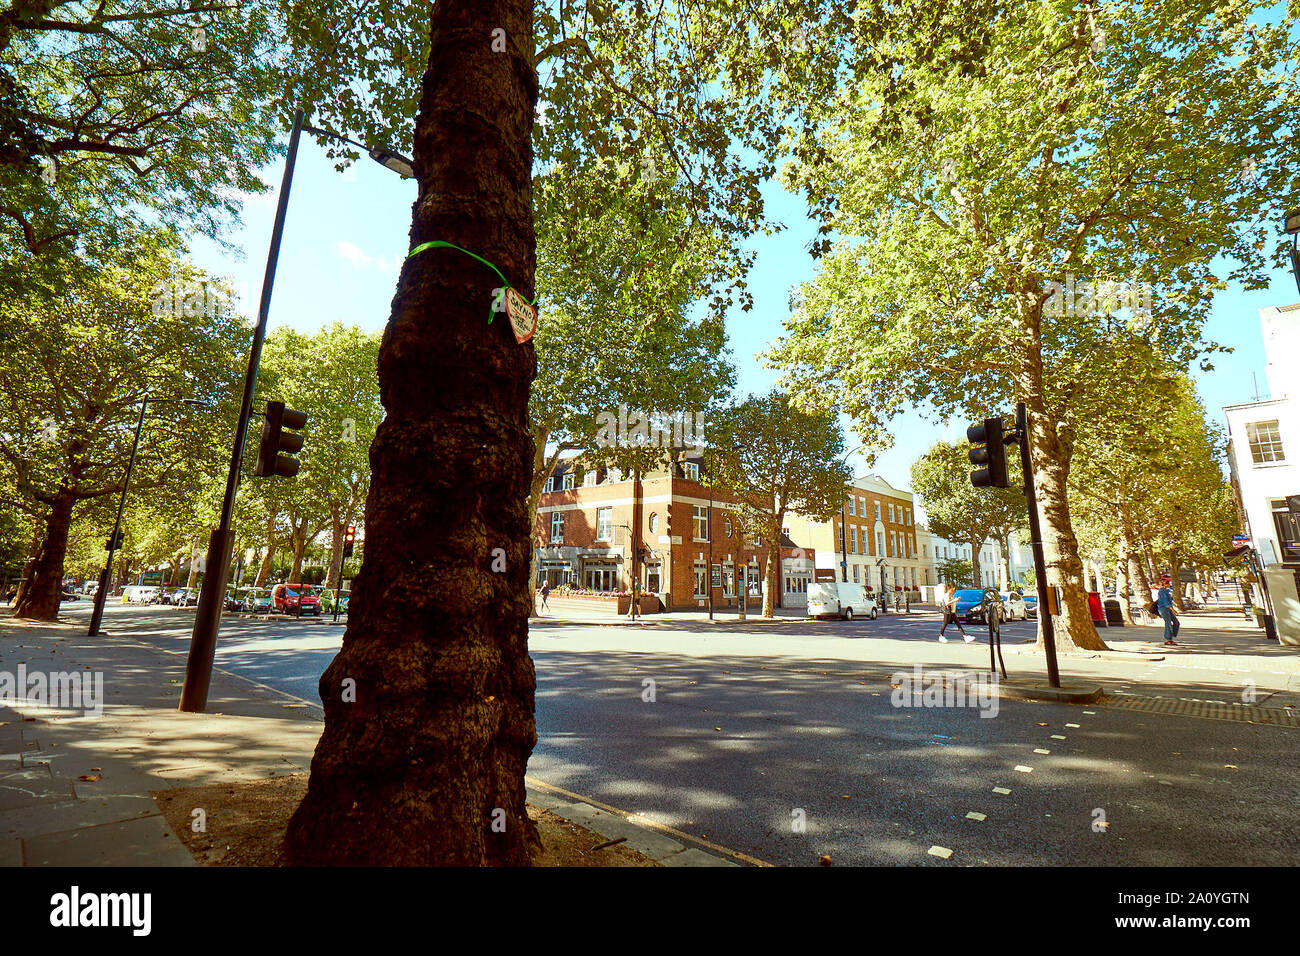 London, U.K. - September 12, 2019: Campaigners have placed heart-shaped signs on tress in Notting Hill in protest at a threat by TFL to destroy them to make way for a cycle lane. Stock Photo